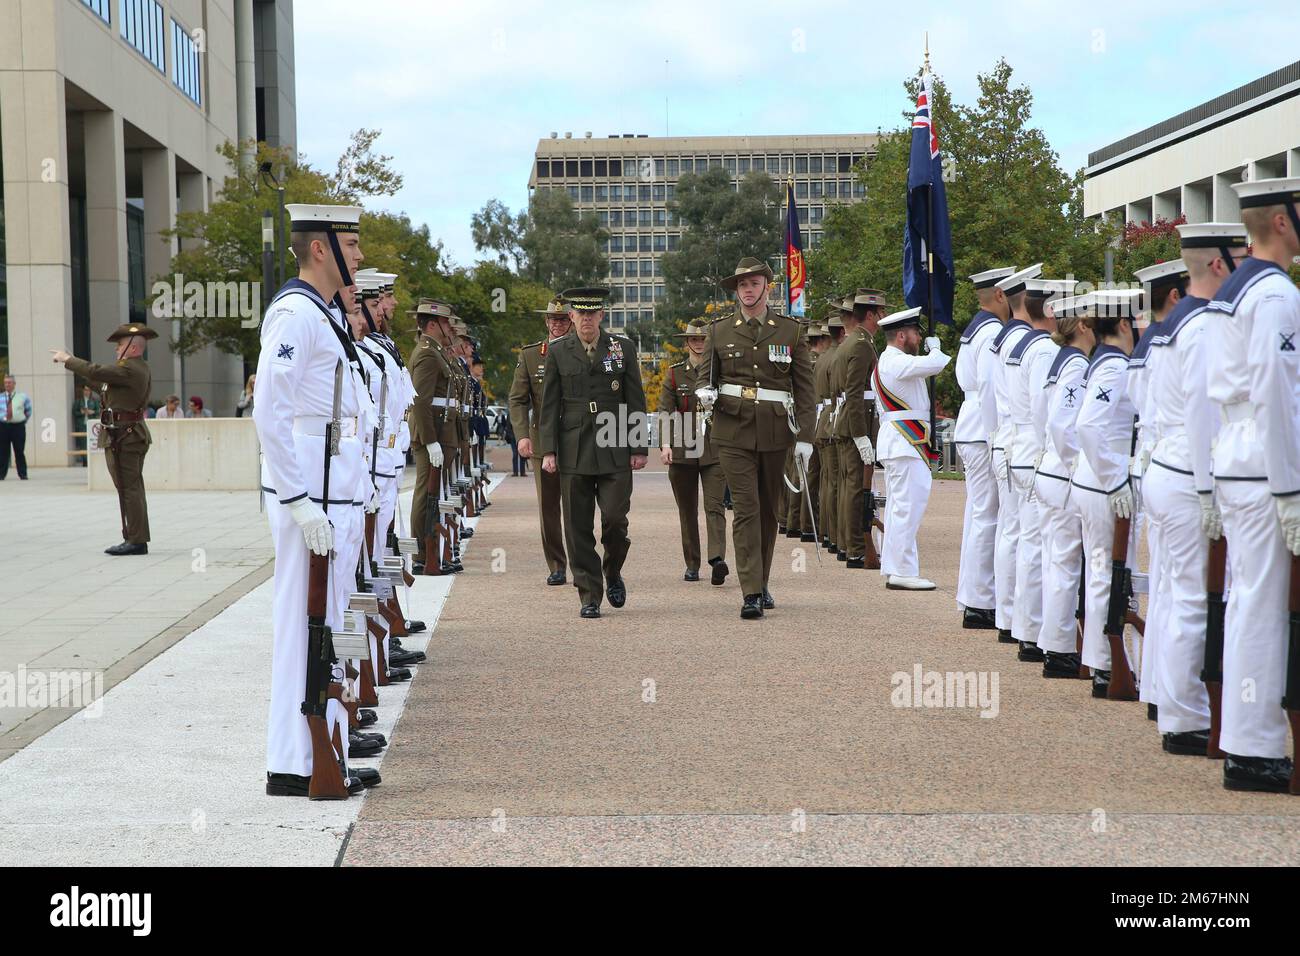 The 38th Commandant of the Marine Corps, Gen. David H. Berger was given honors in an Australian Defence Force Honor Guard Ceremony, Canberra, Australia, April 13, 2022. Stock Photo